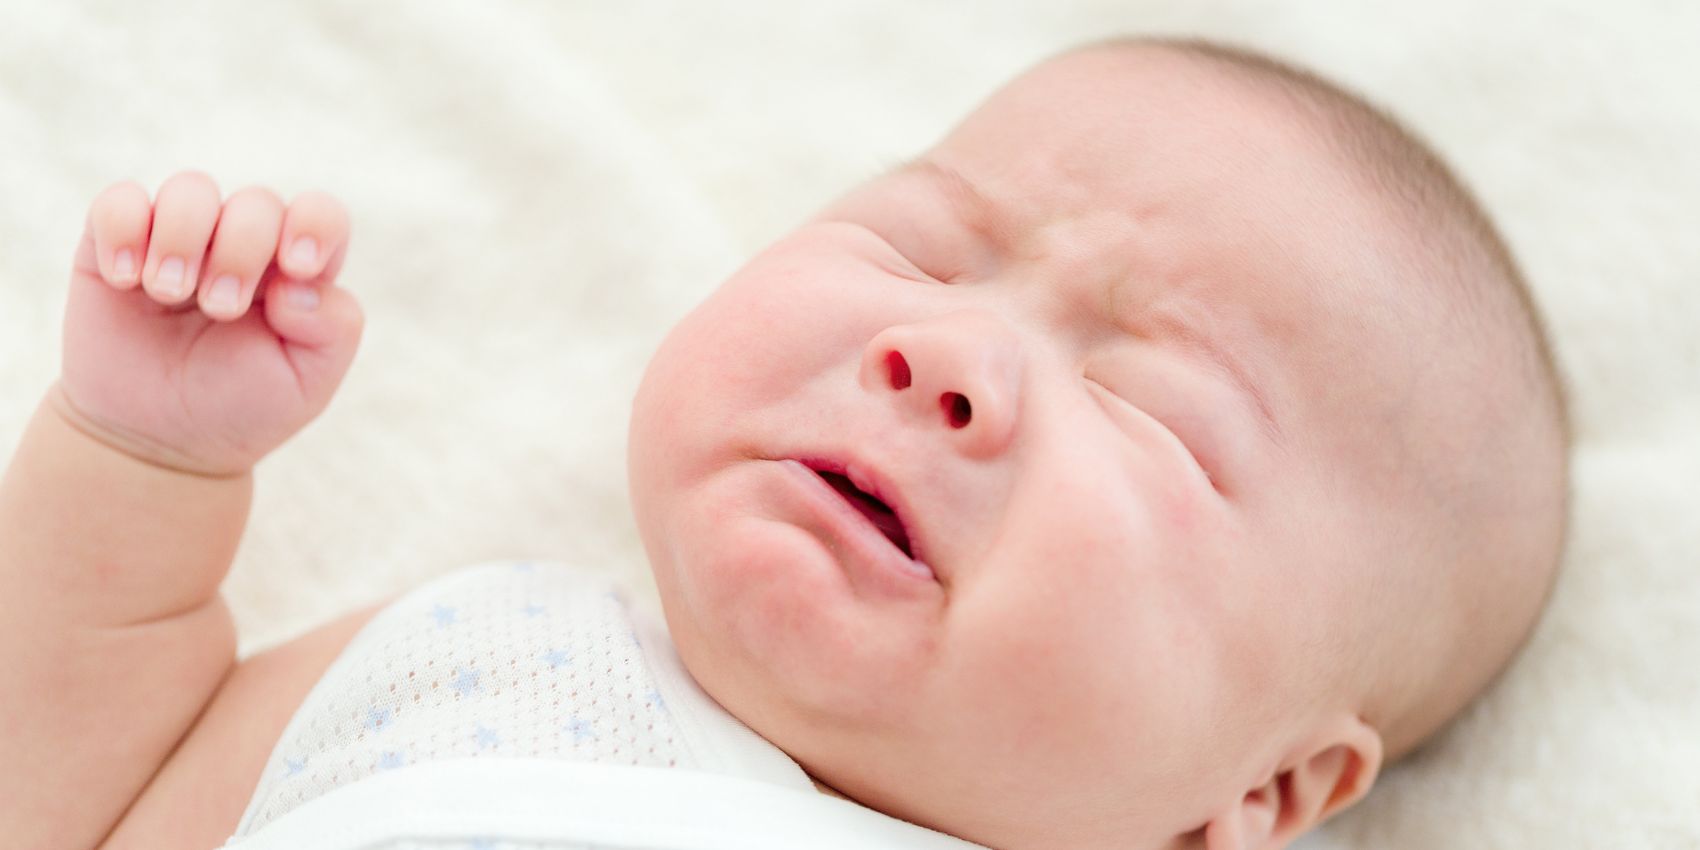 Newborn baby crying to express hunger